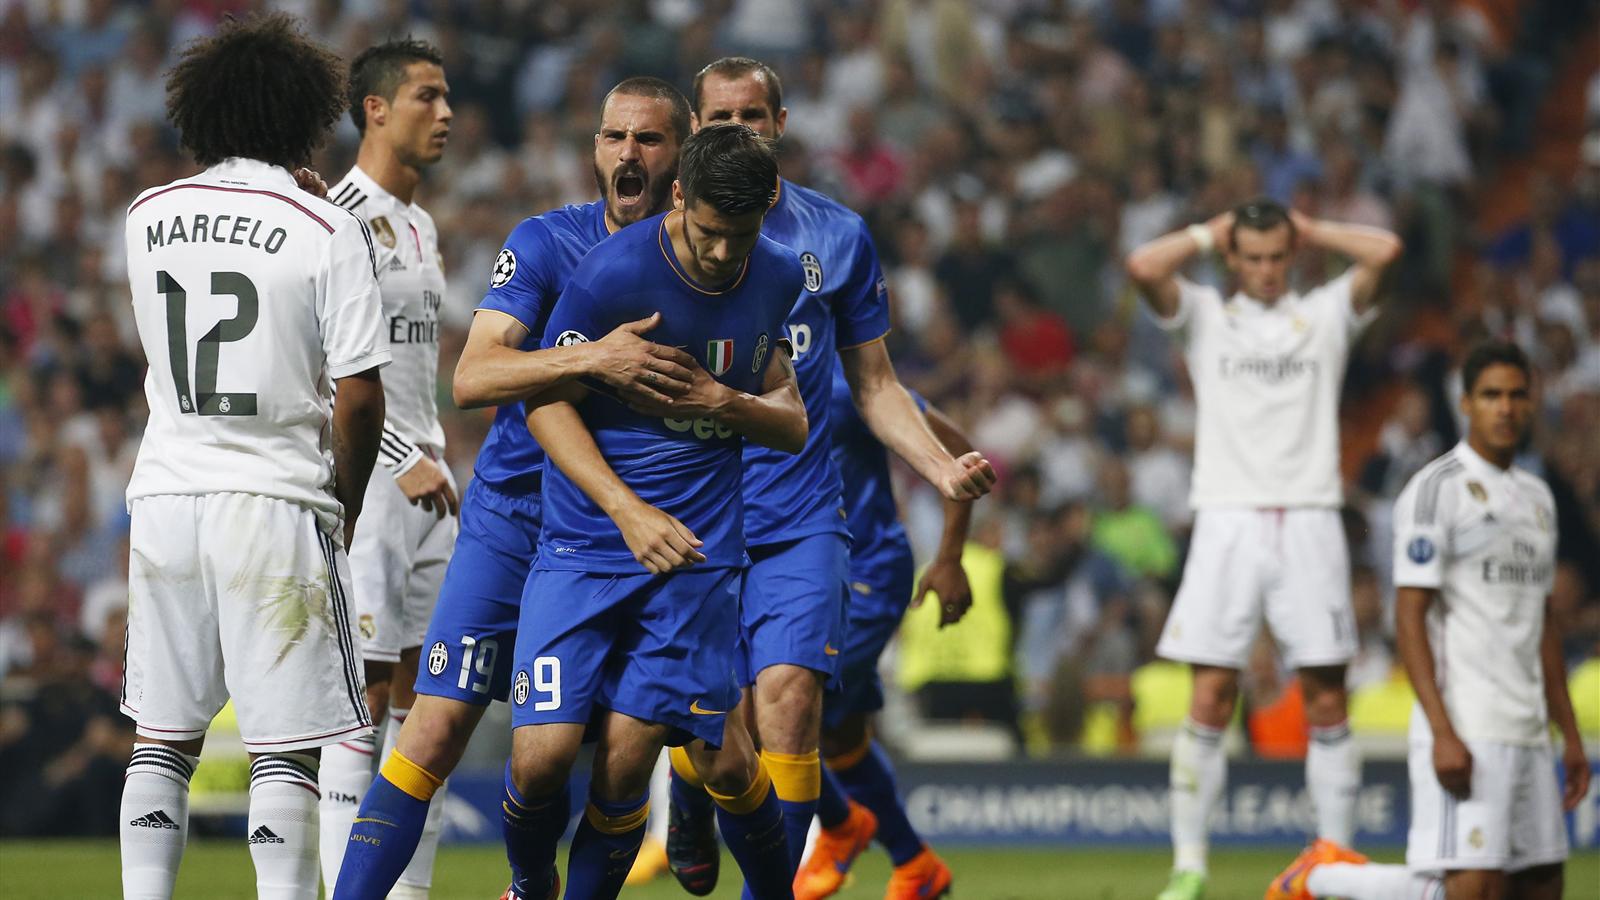 Juventus edge out Real Madrid to set up final with Barca